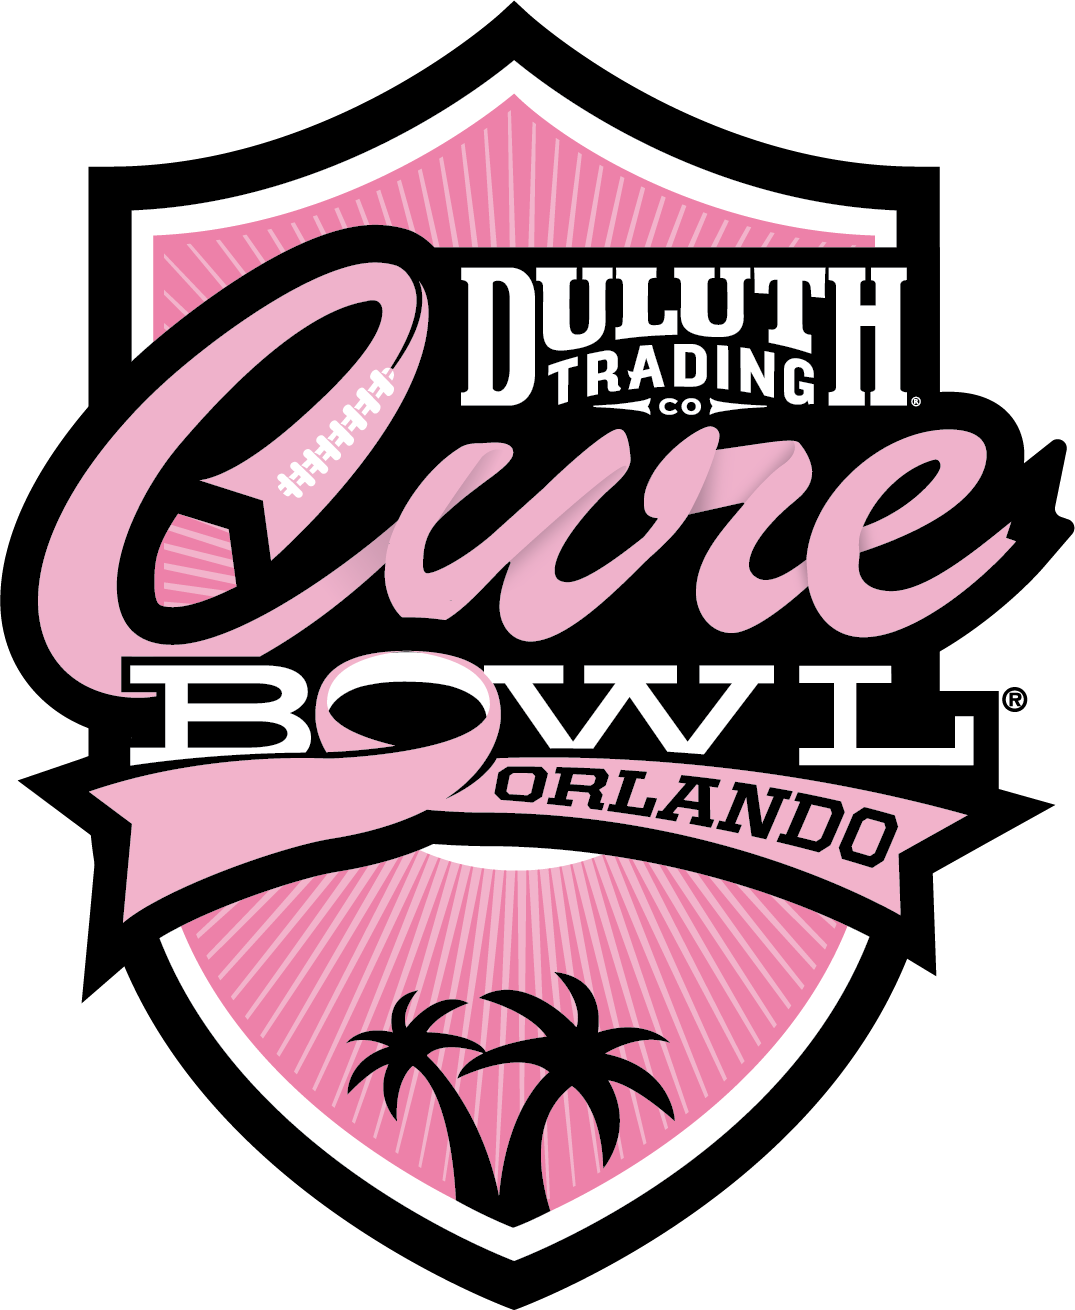 Duluth Trading Company Named Title Sponsor of 2022 Cure Bowl in Orlando